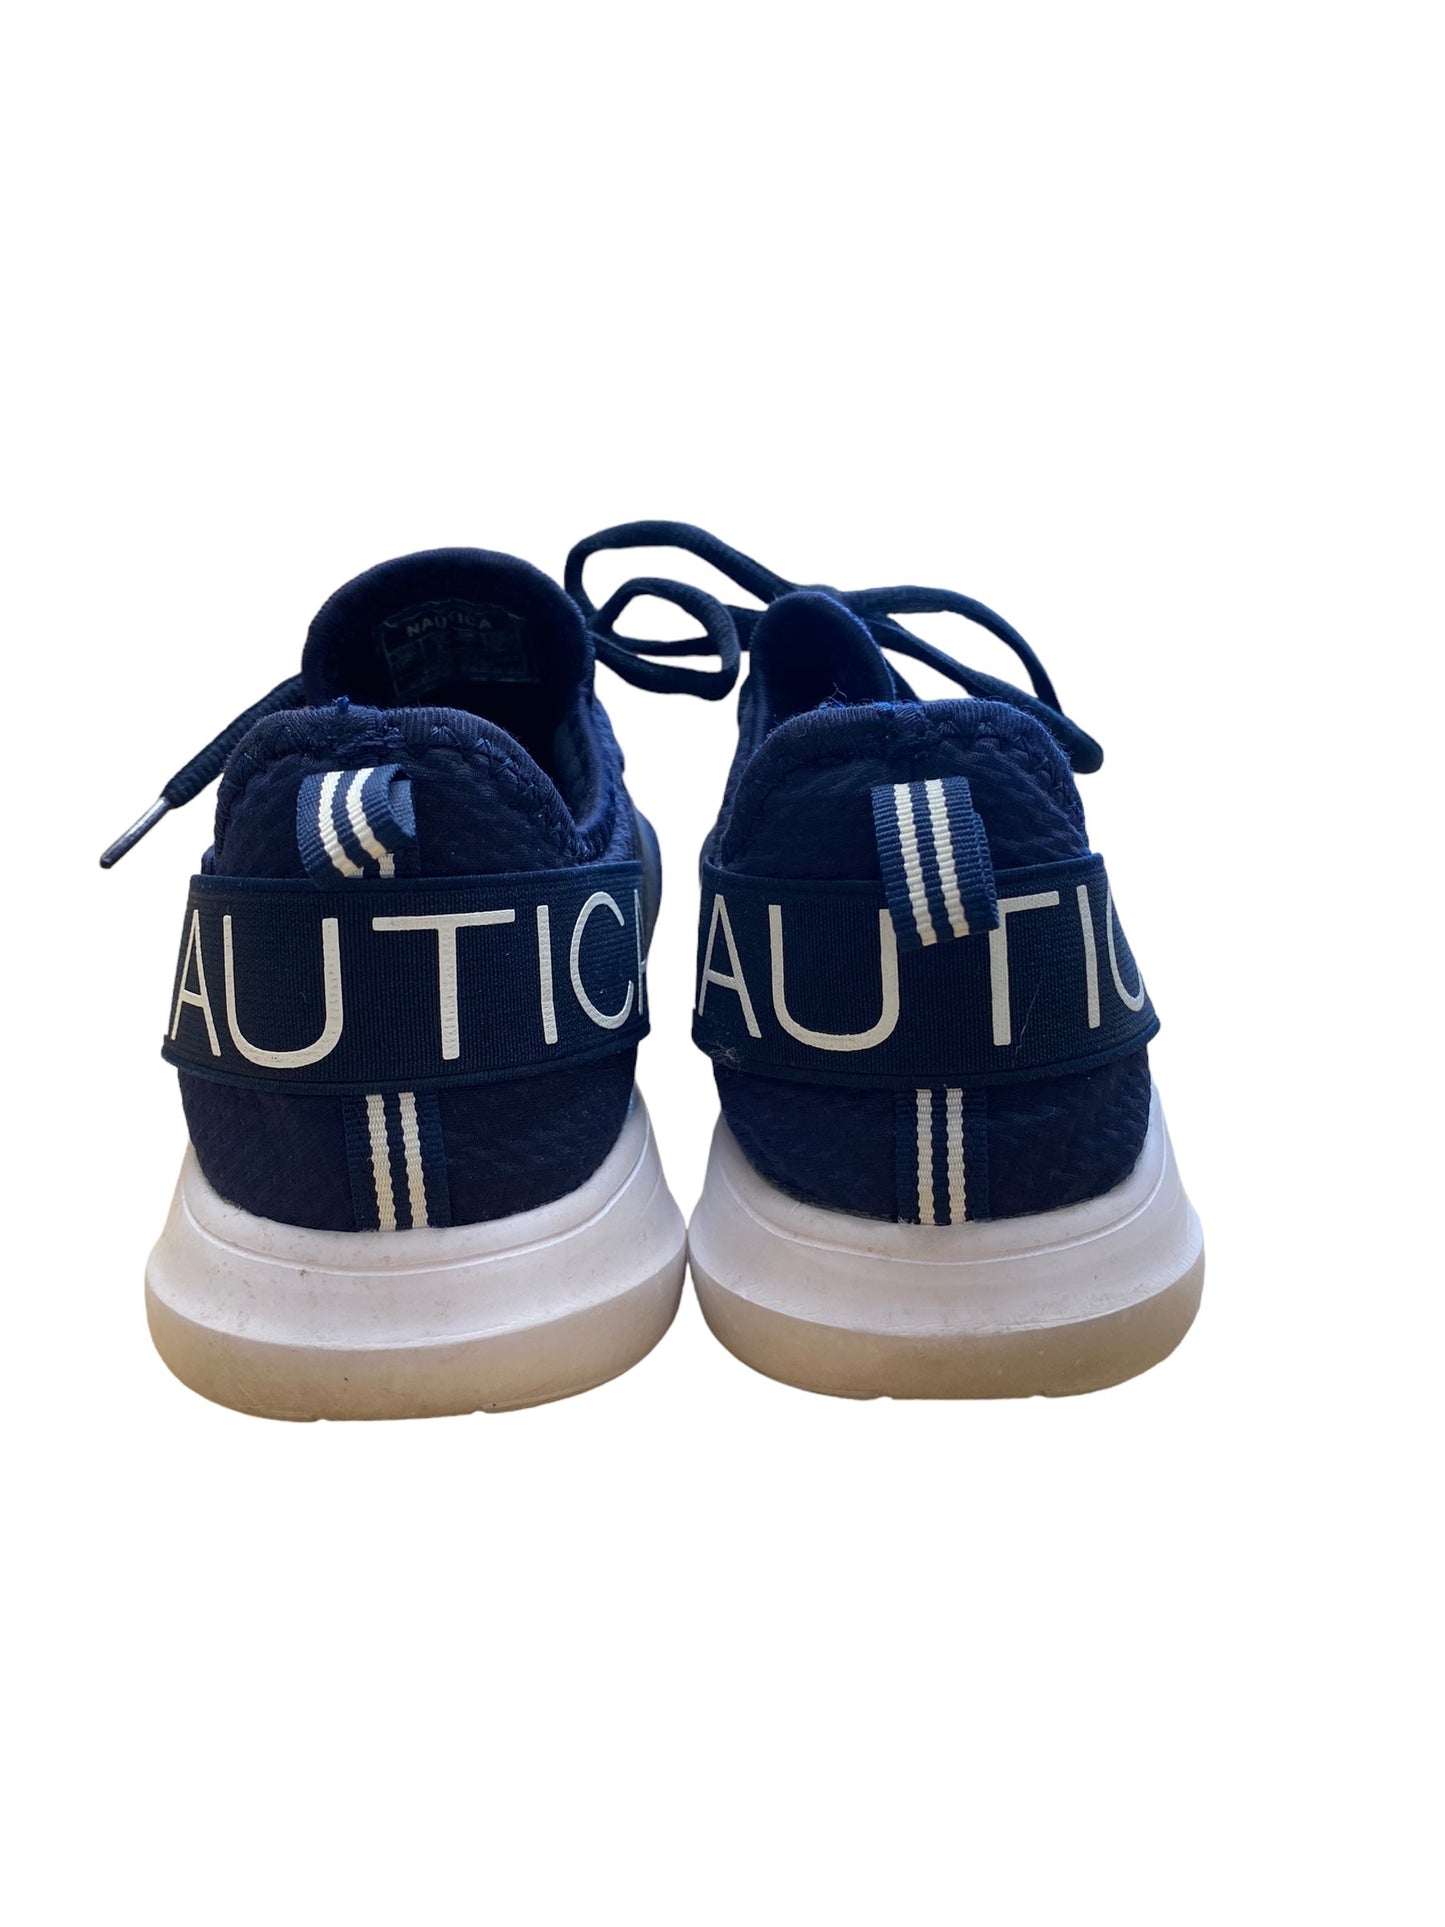 Shoes Athletic By Nautica  Size: 8